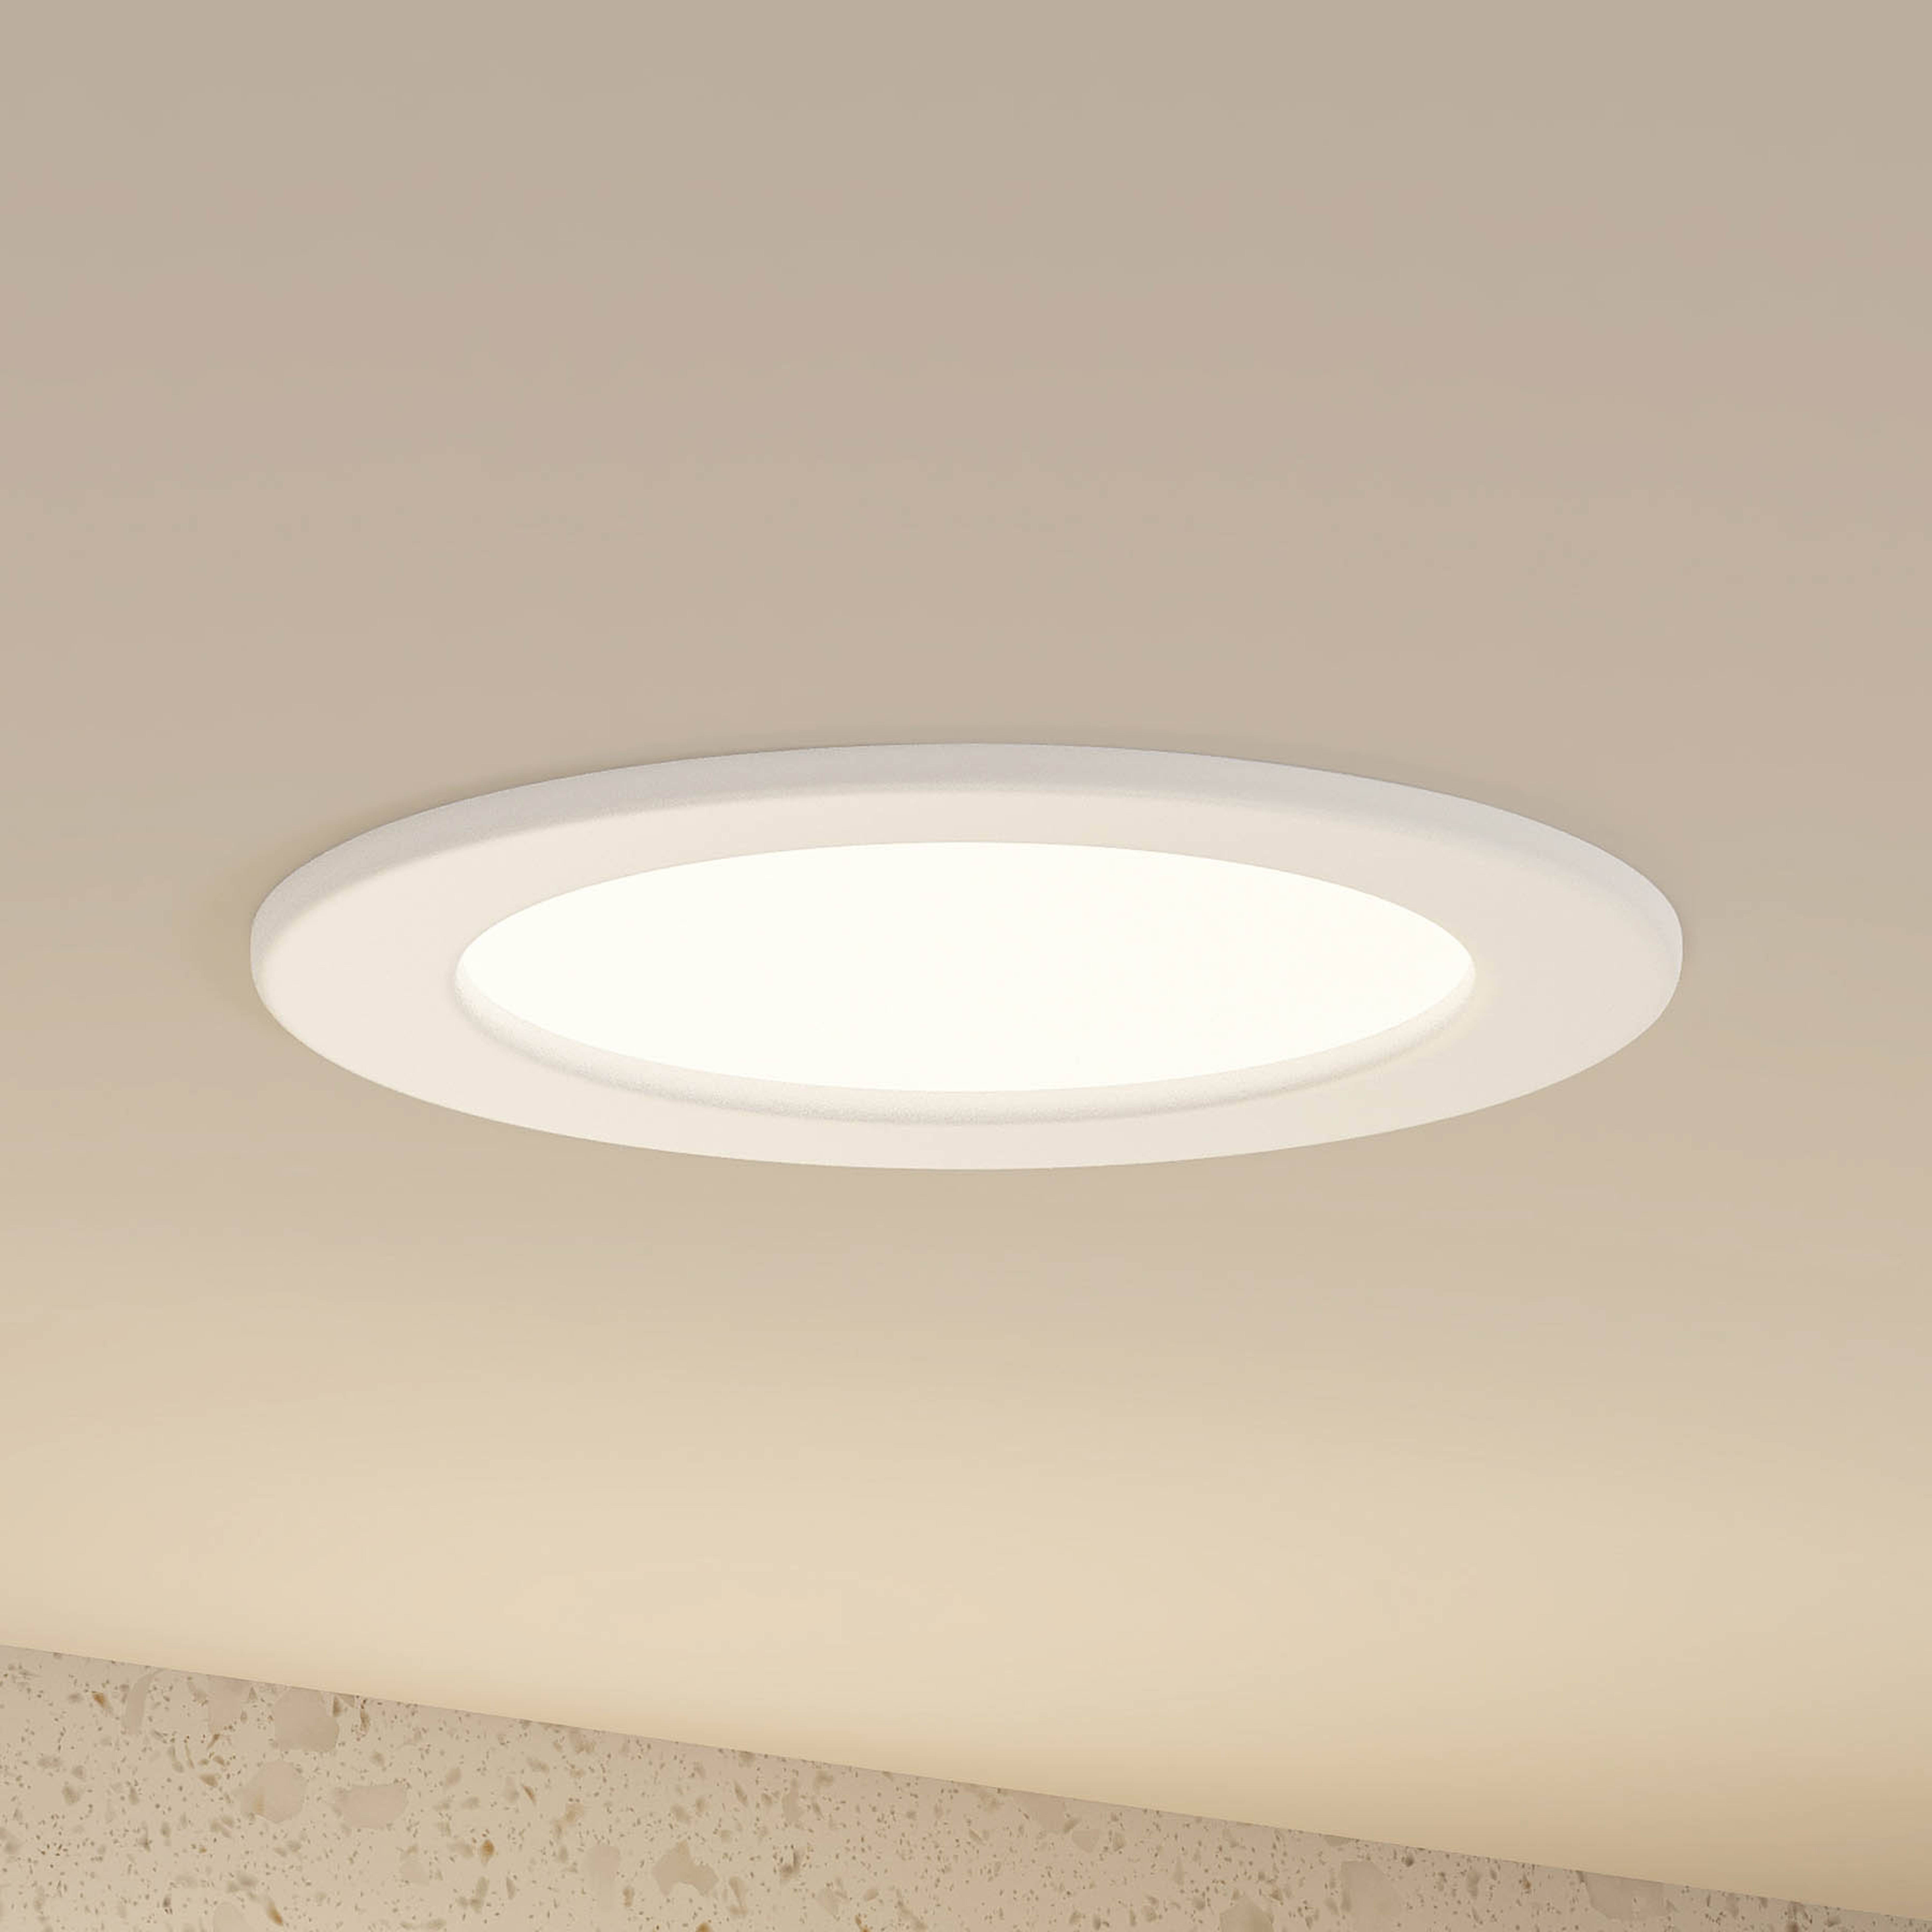 Prios LED recessed light Cadance, white, 17 cm, dimmable